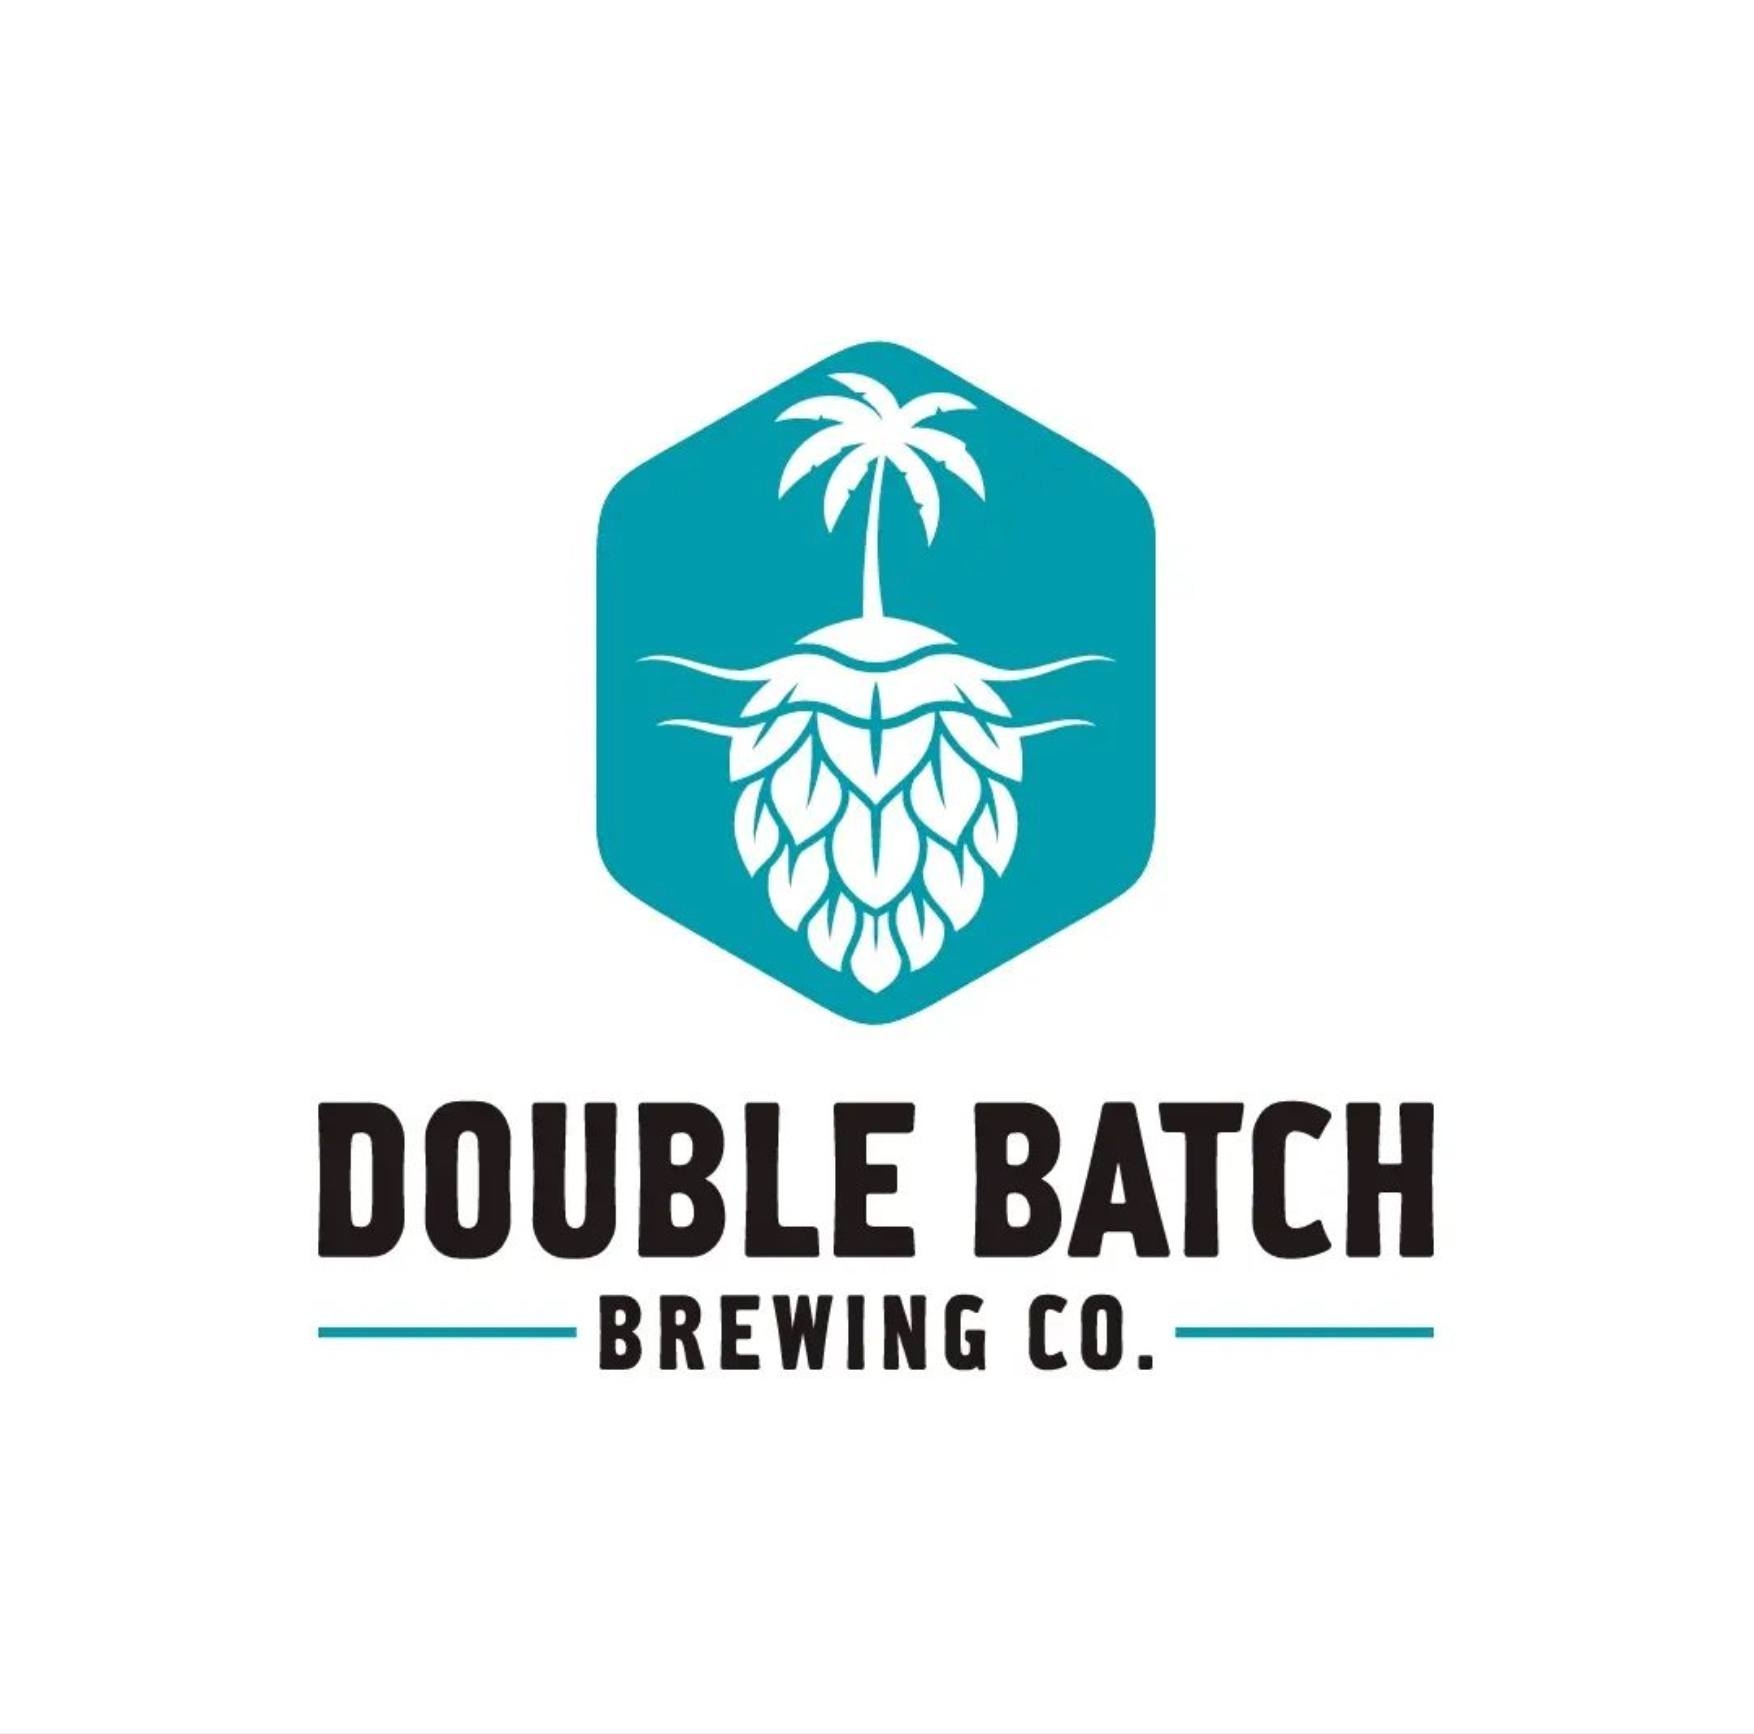 Double Batch Brewing Co